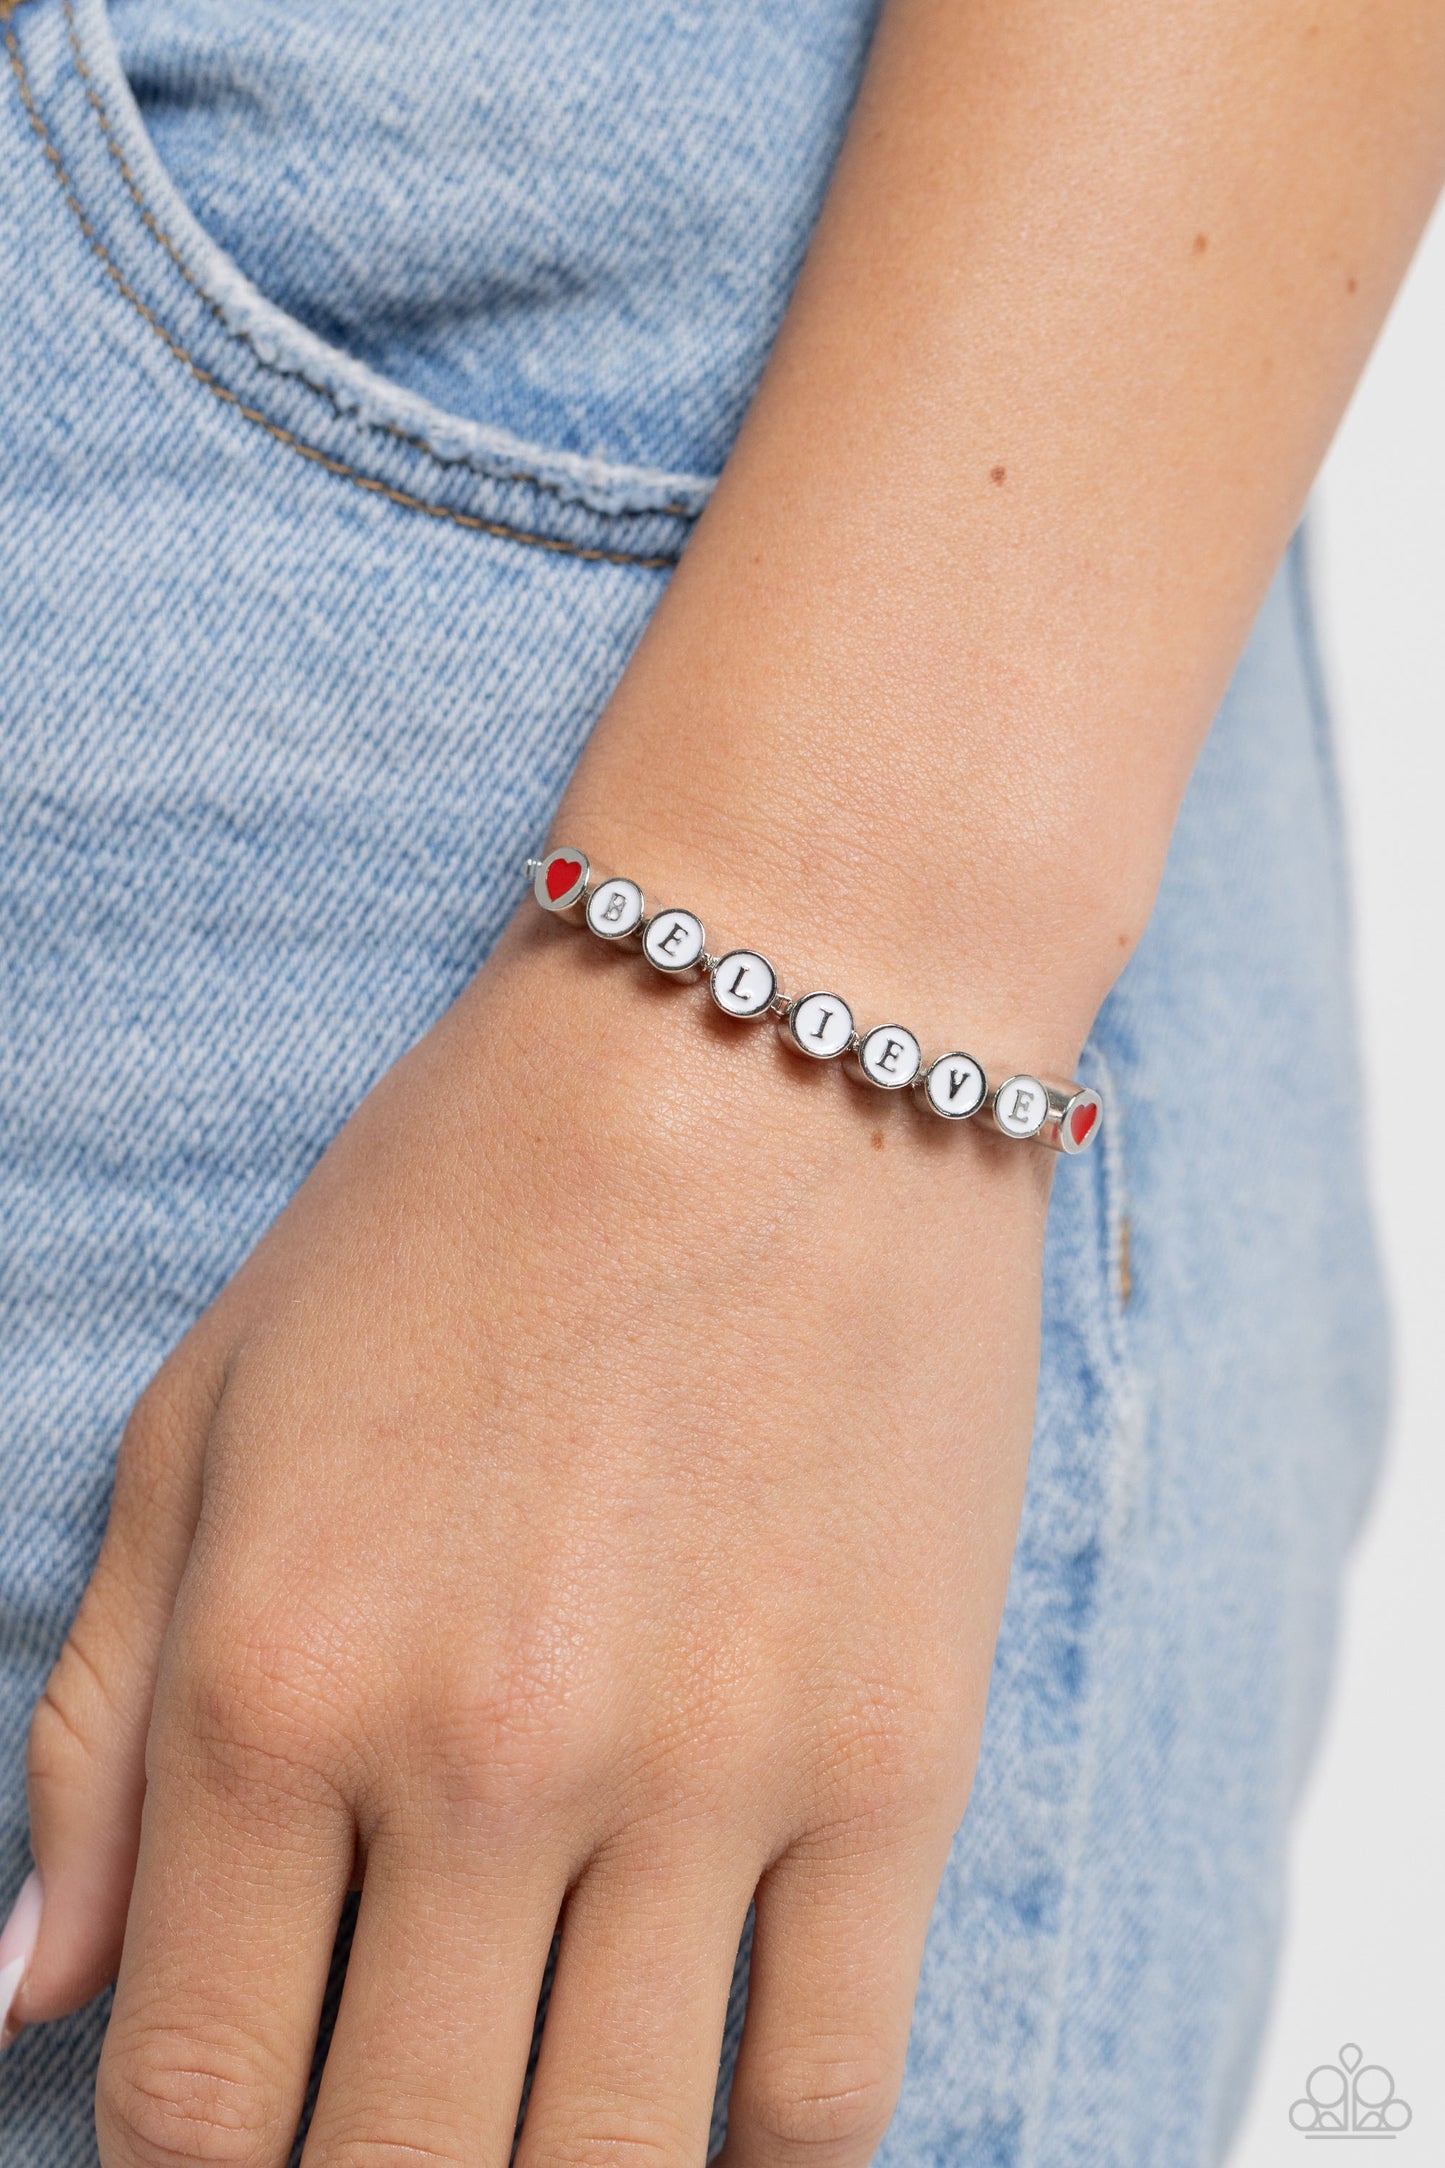 I Cant Believe It! White Sliding Bead Bracelet - Paparazzi Accessories  Delicately attached to a dainty silver box chain, thick circular silver fittings spell out the word "BELIEVE" across a white-painted backdrop with red-painted hearts embellishing the ends of the word, creating a sleek inspiring display. Features an adjustable sliding bead closure.  Sold as one individual bracelet.  Sku:  P9WD-WTXX-141XX